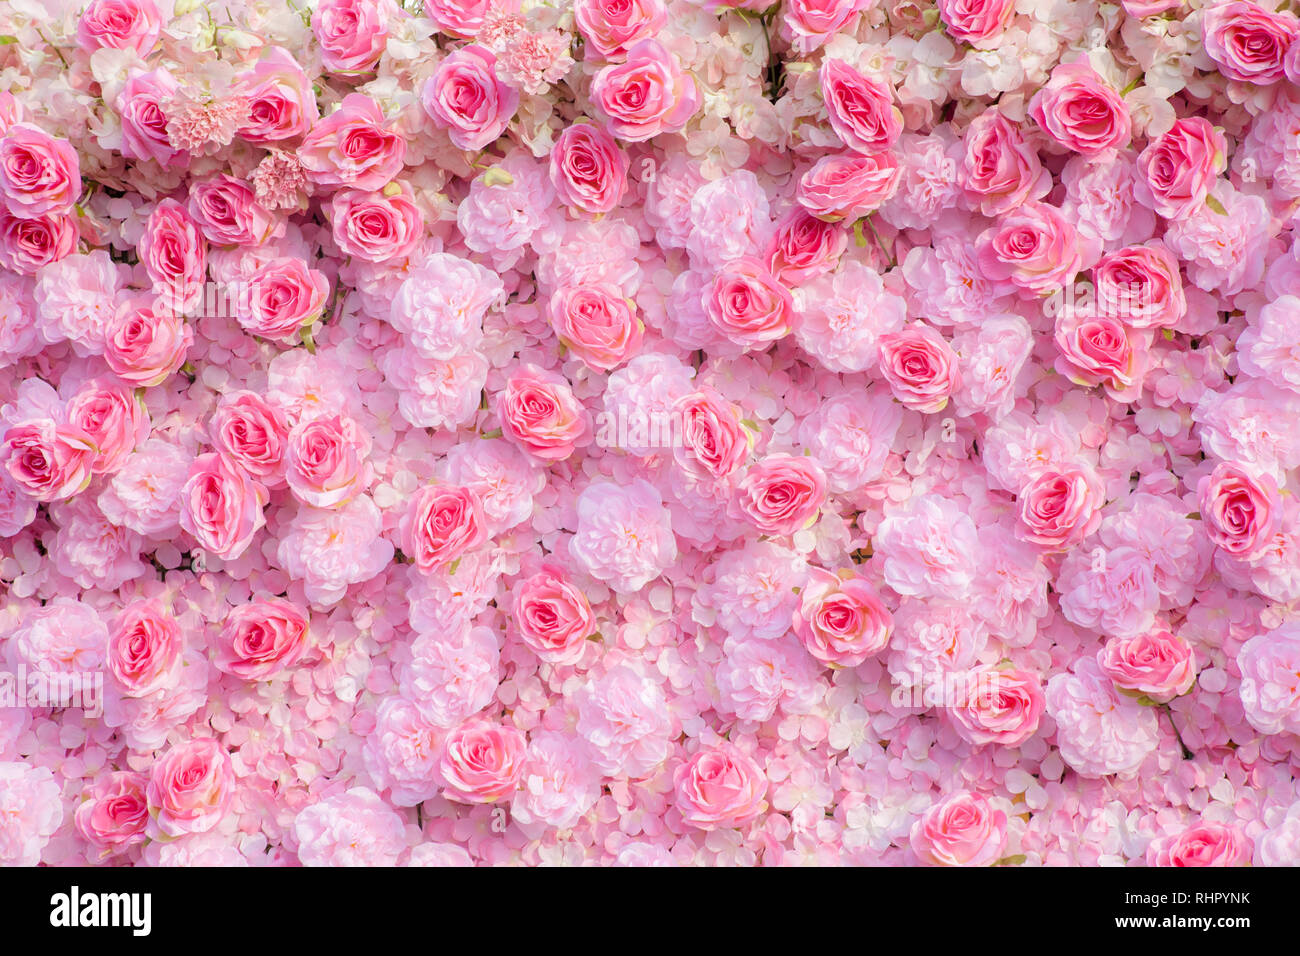 Pink roses background / Pink roses wallpaper Stock Photo - Alamy